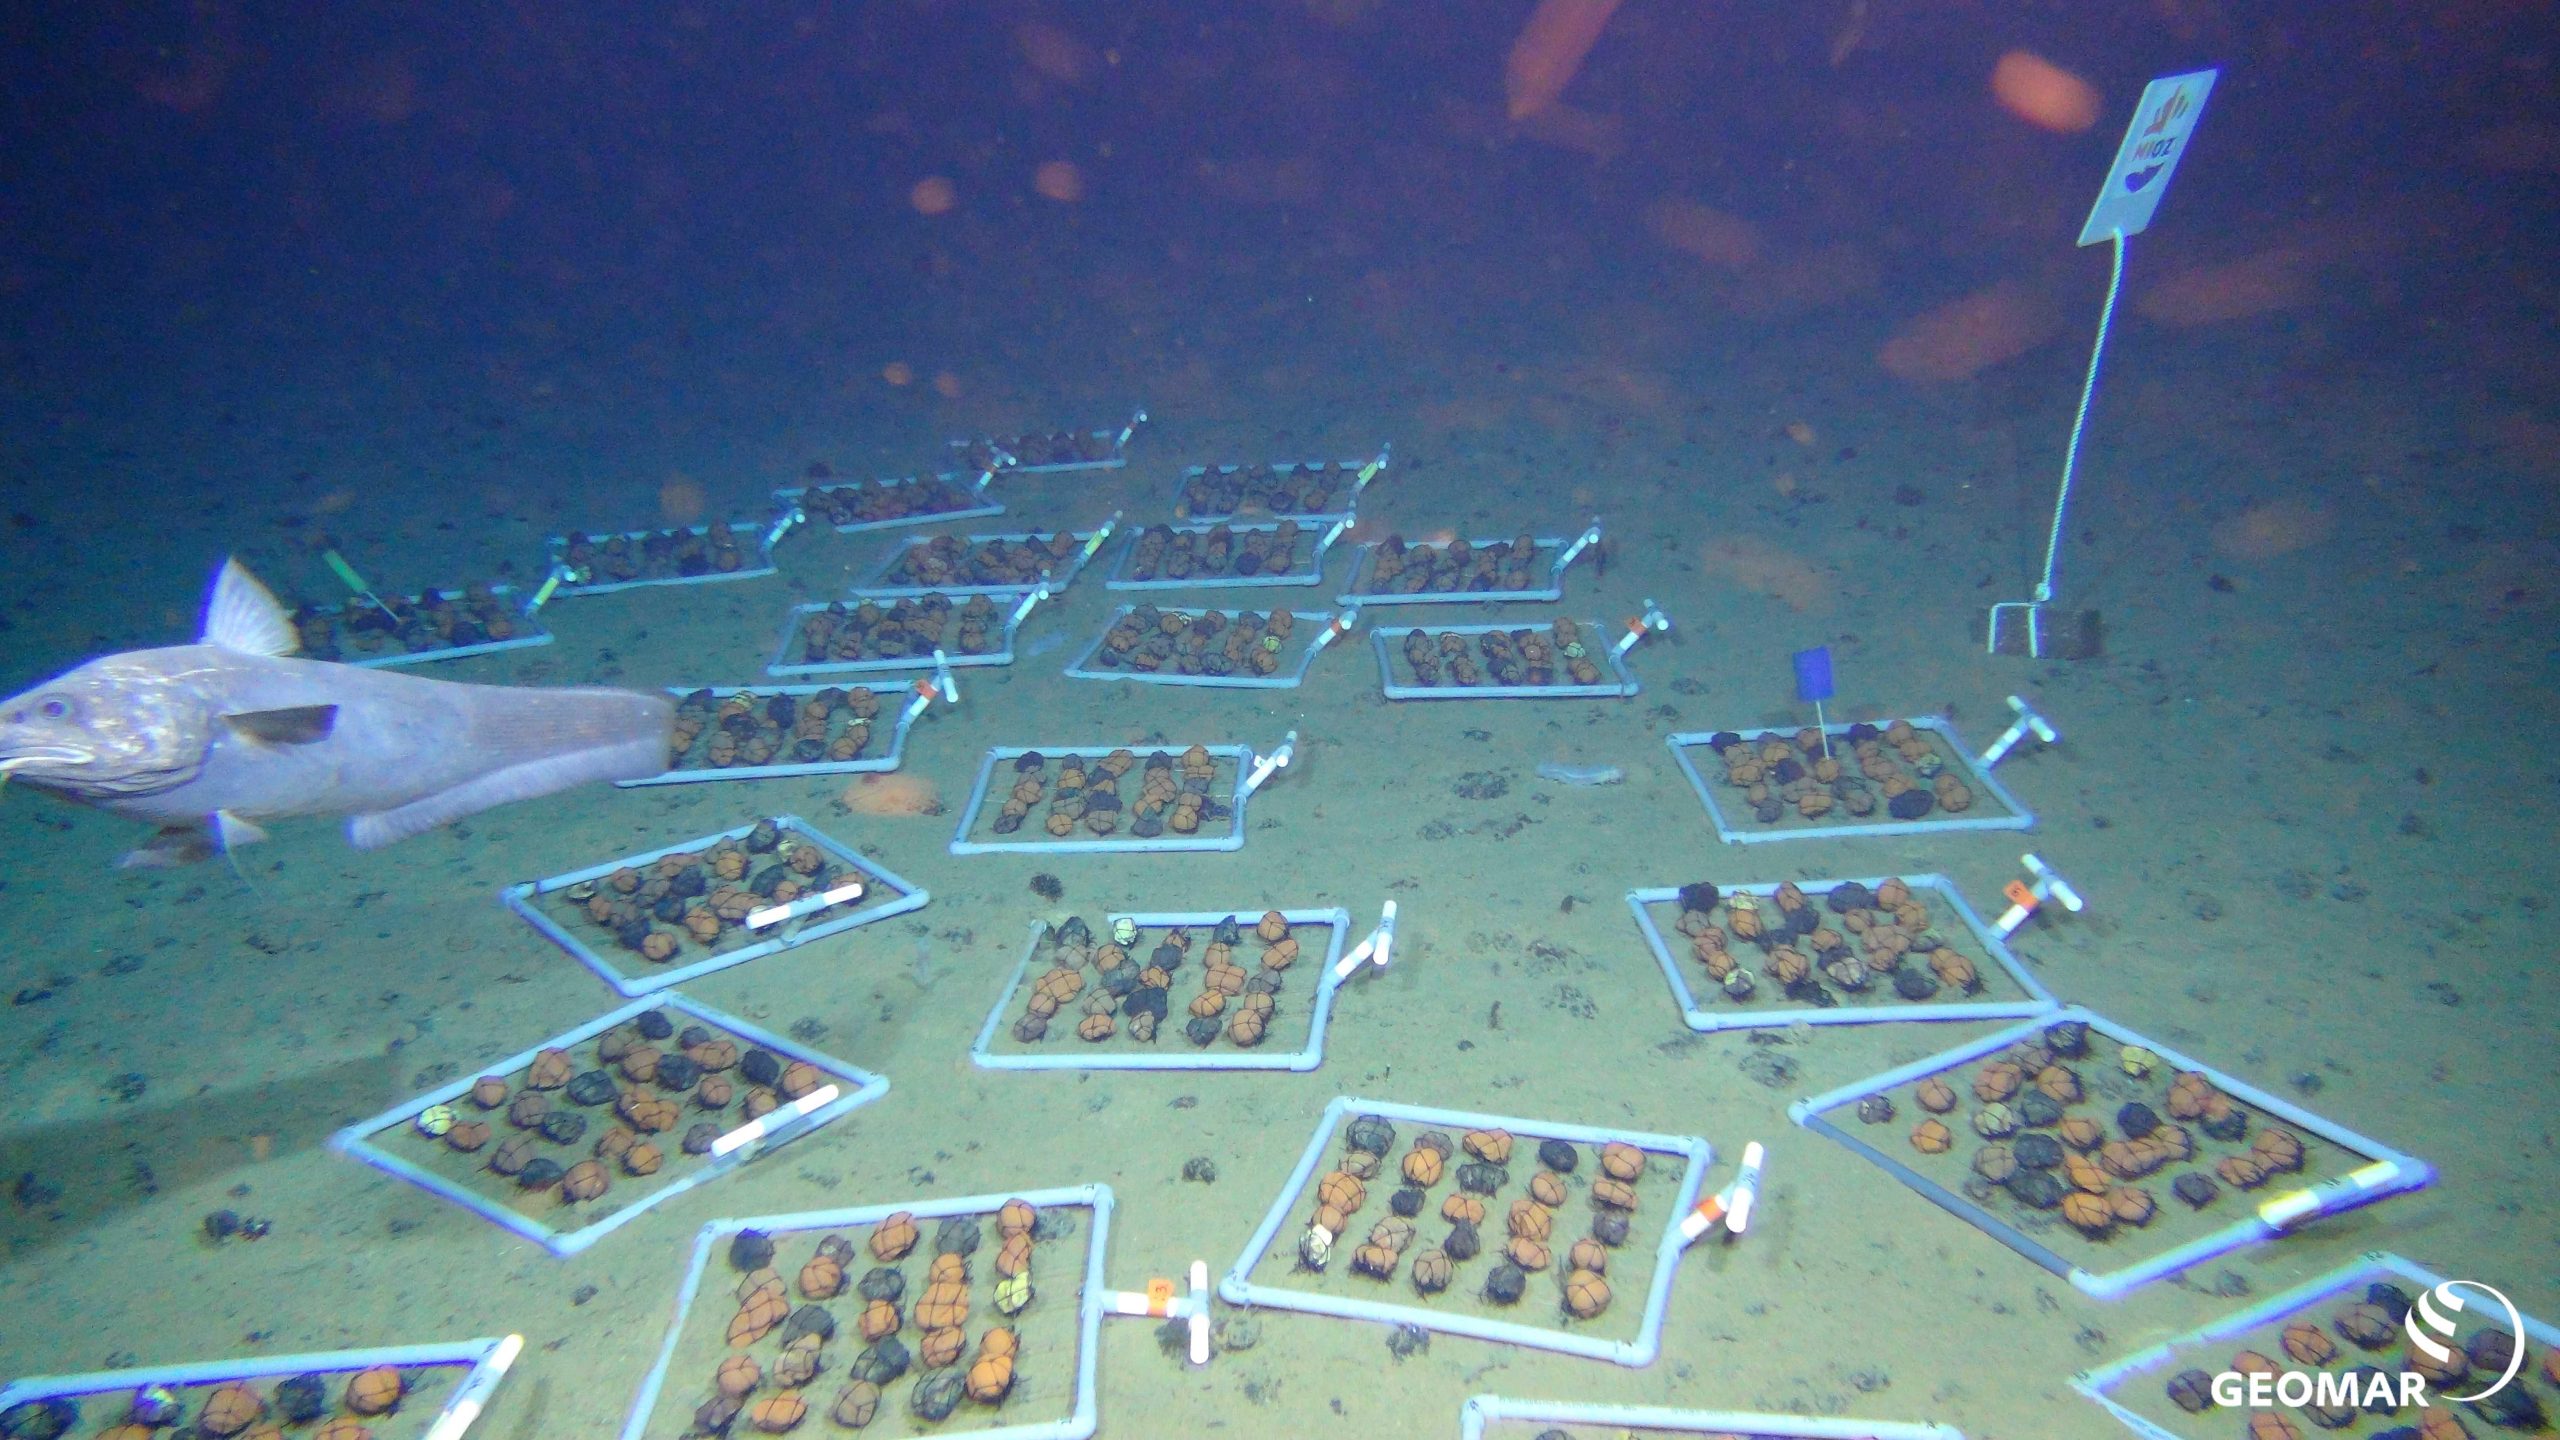 Image shows the deep-sea mining and investigation of the impact that potential manganese nodule mining in the deep sea would have on ecosystems there.